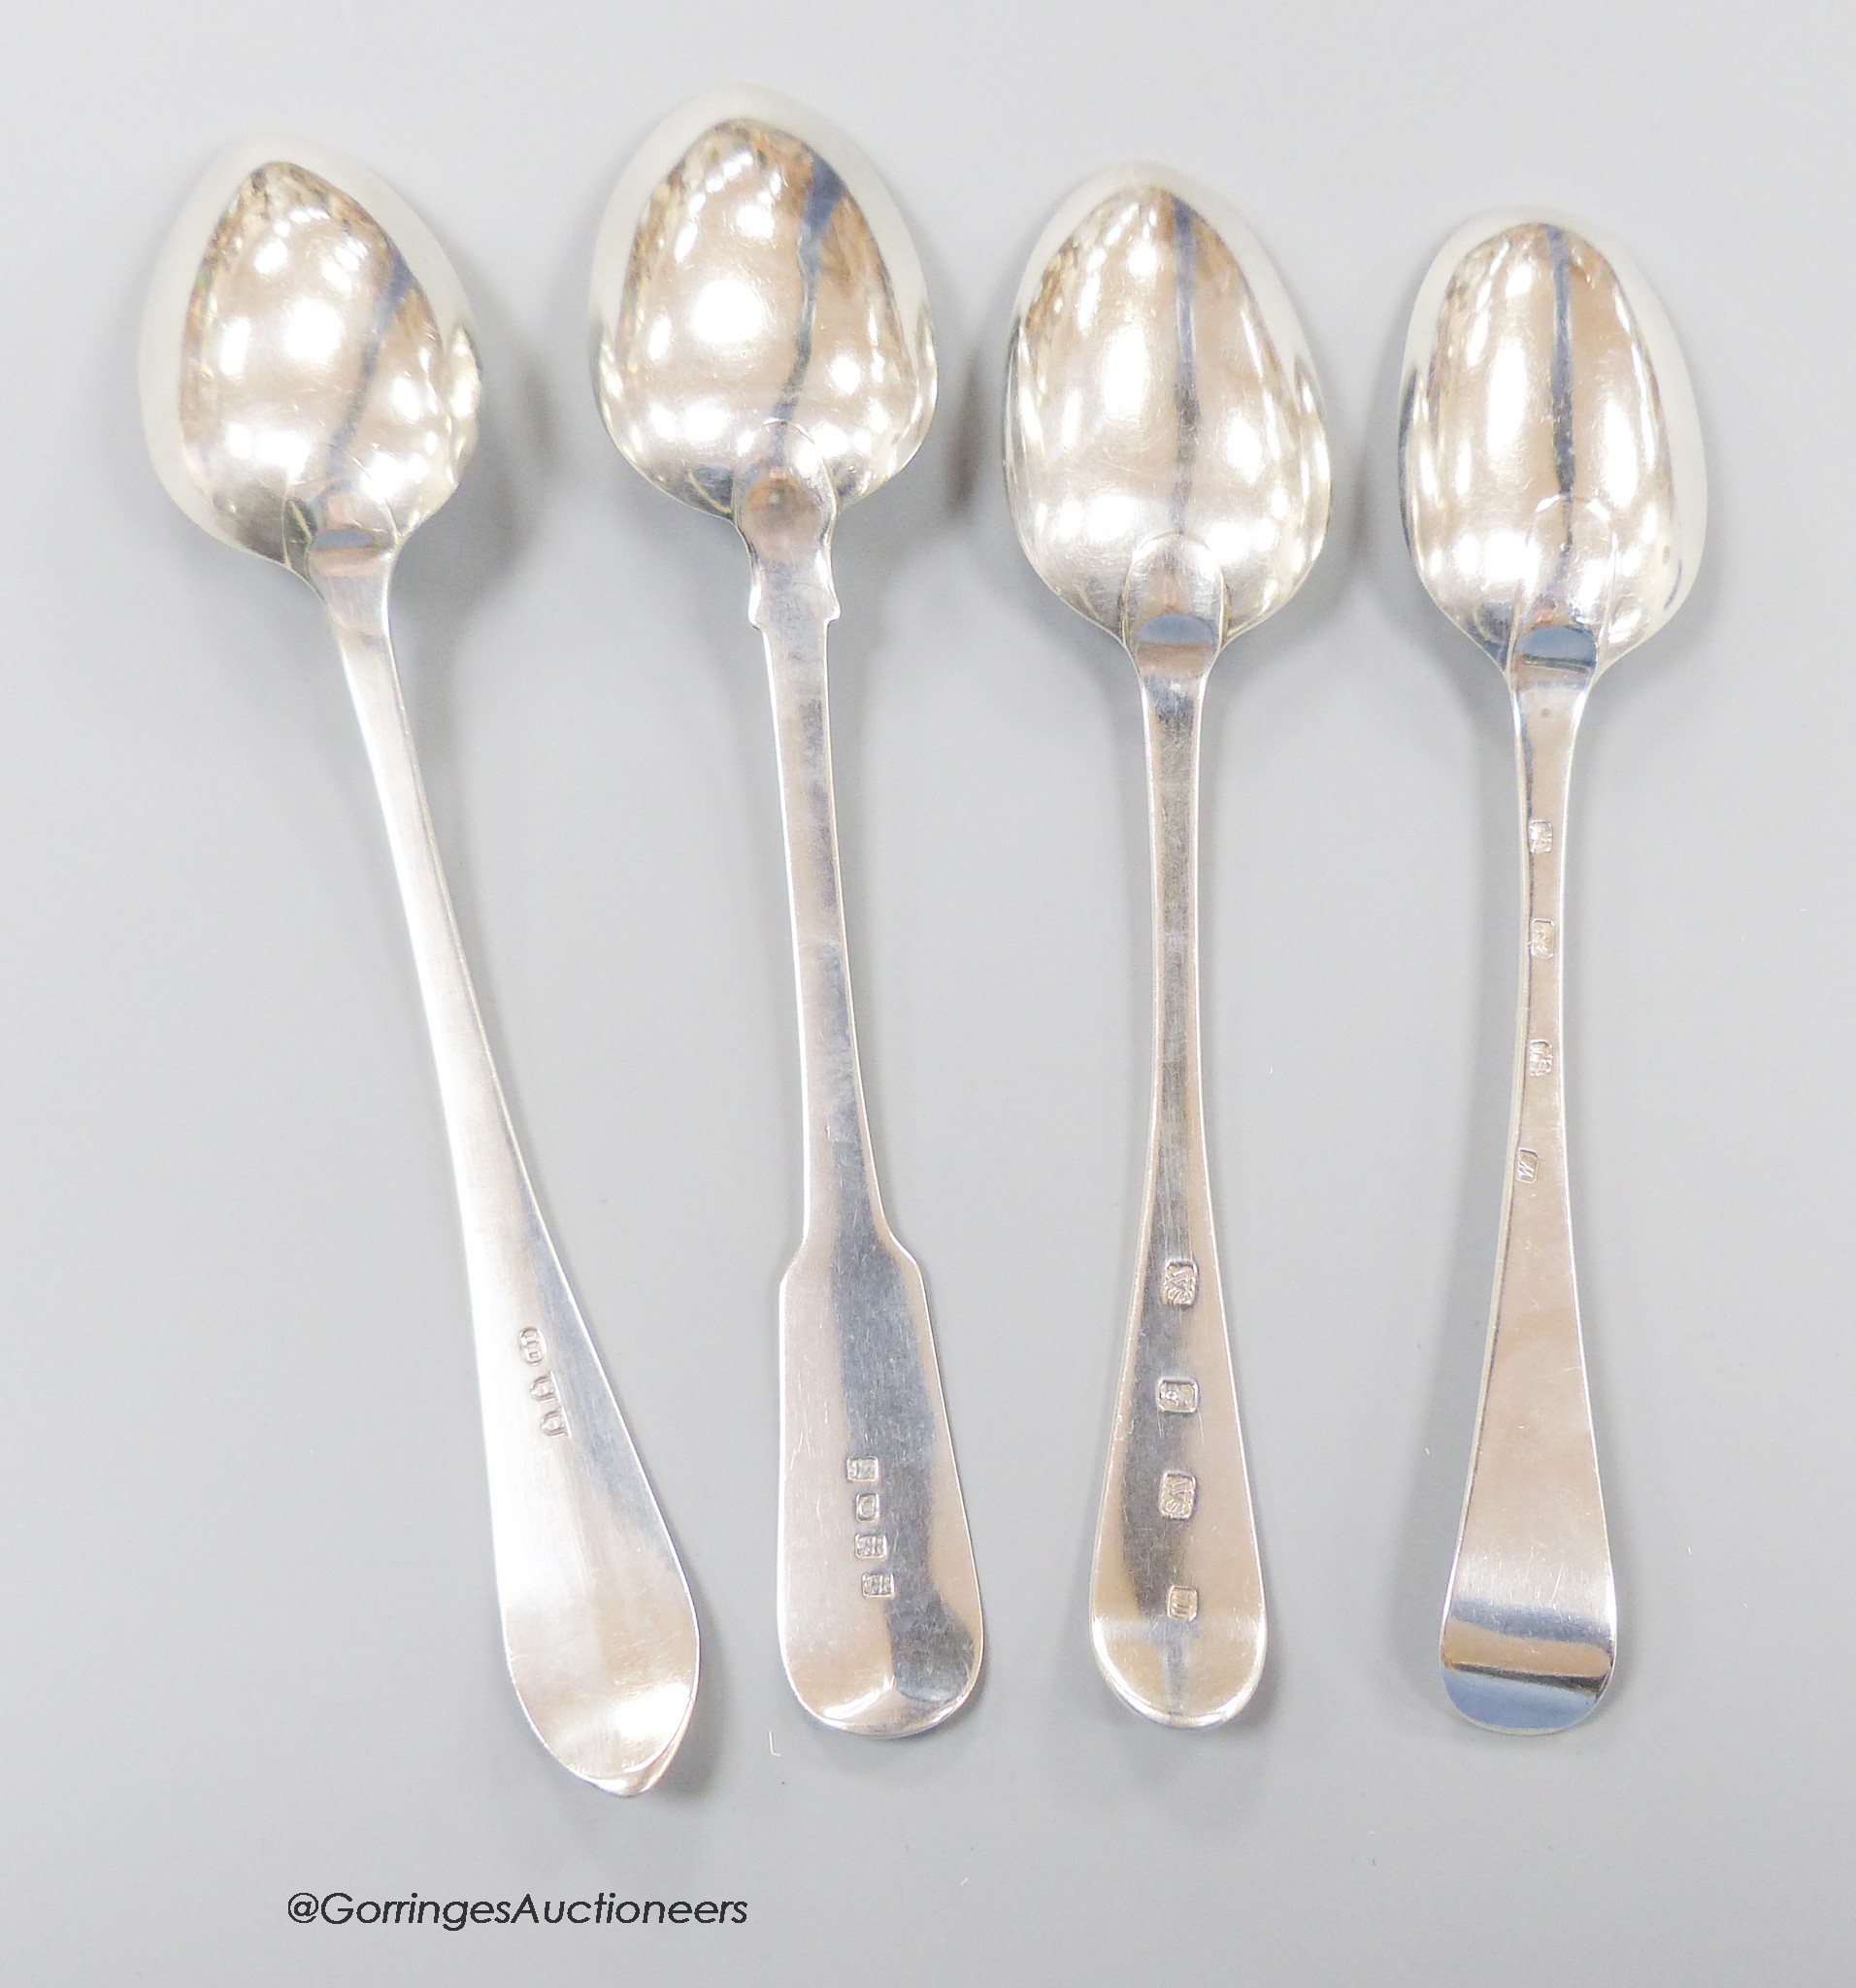 Three 18th century Scottish provincial Dundee table spoons (John Steven, William Scott and James Douglas) and a later fiddle pattern tablespoon, possibly Dundee?, 23cm, 8.5oz.